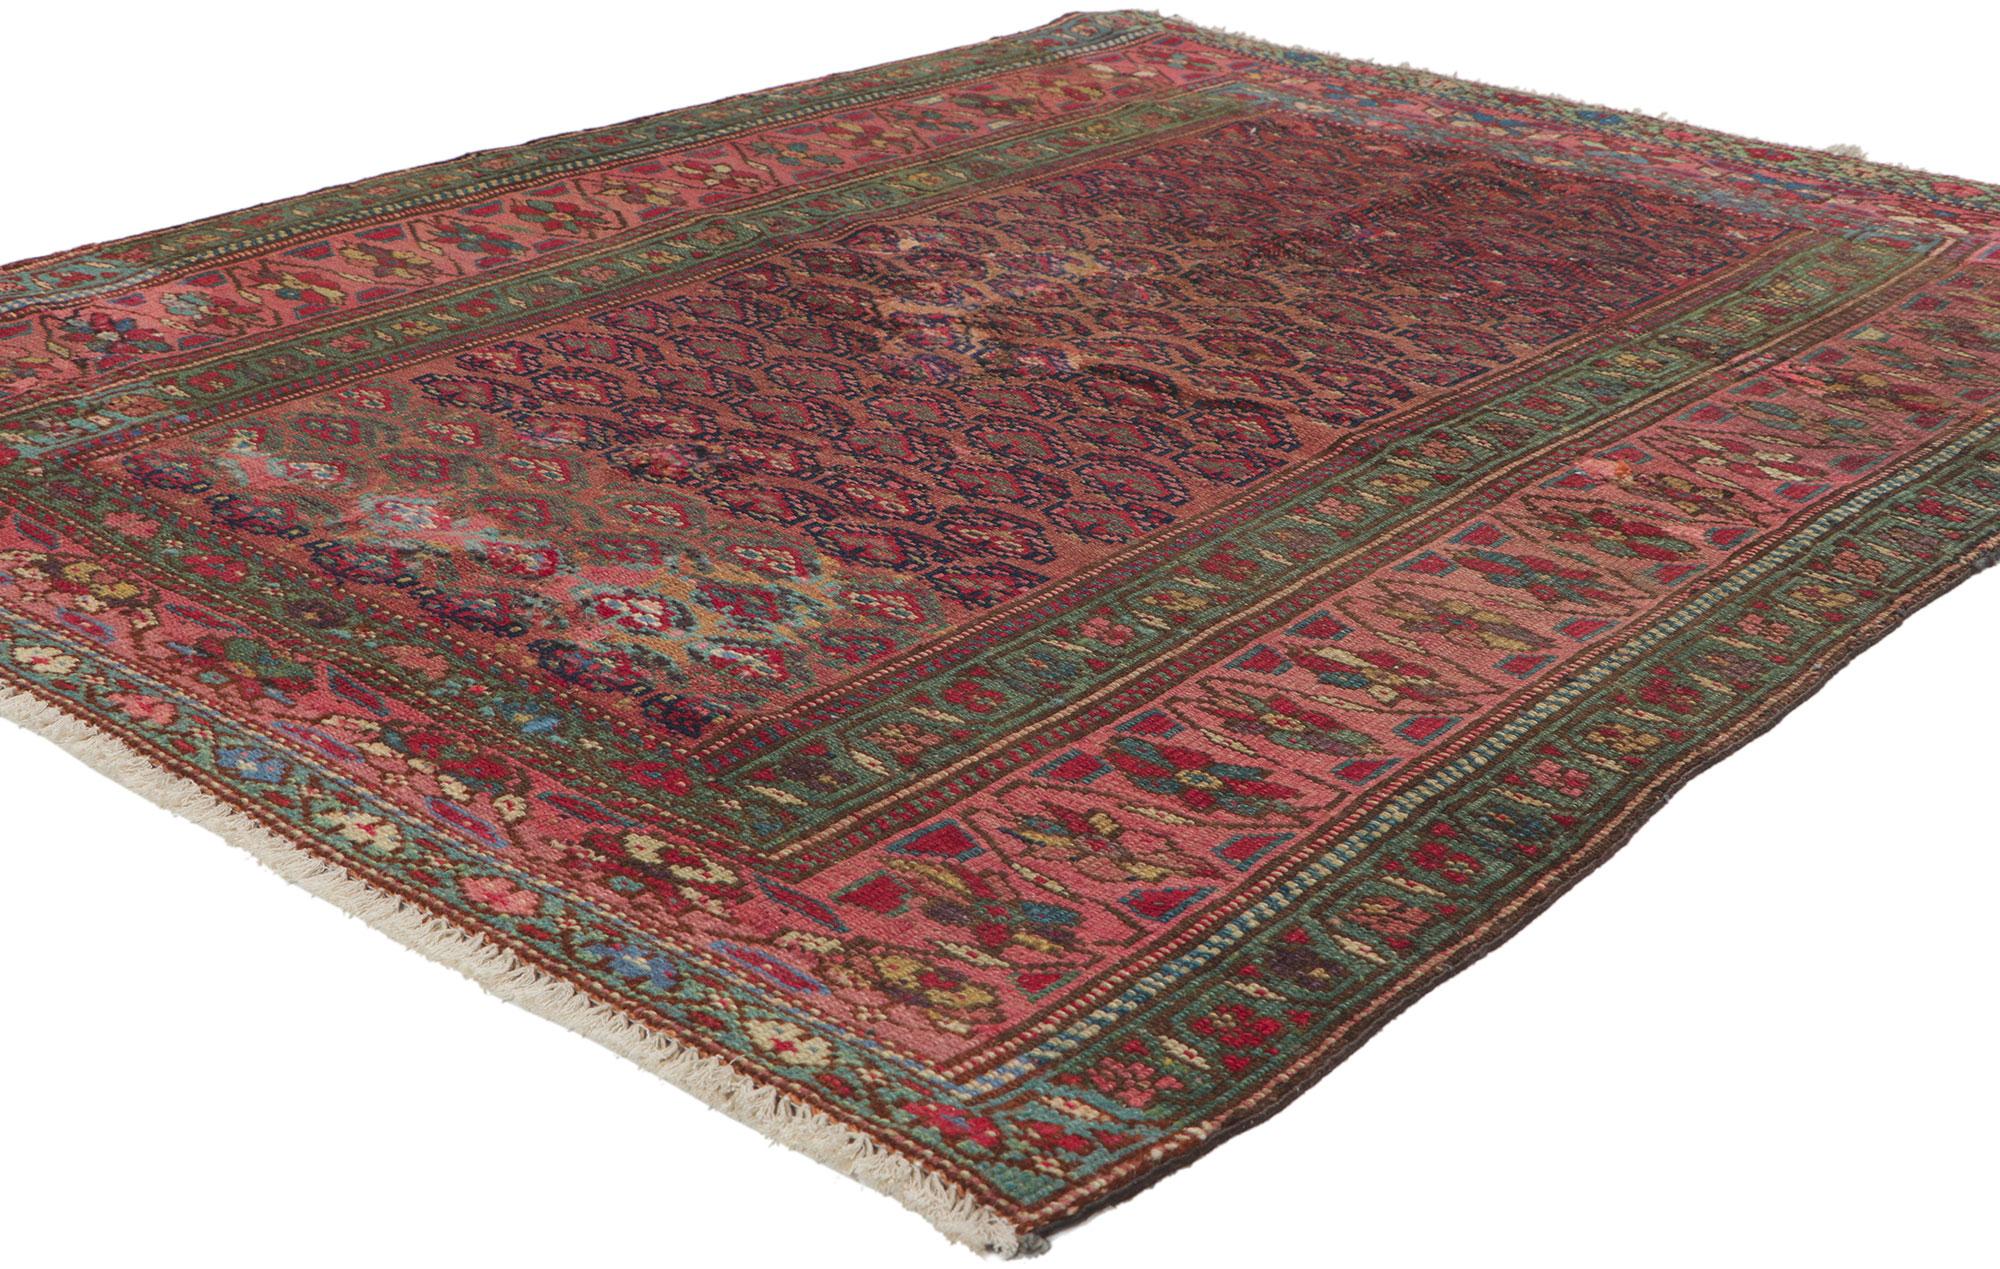 ?61123 Antique Persian Hamadan rug, 03'11 x 04'11.
With its timeless style, incredible detail and texture, this hand knotted wool antique Persian Hamadan rug is a captivating vision of woven beauty. The repeating boteh design and traditional color